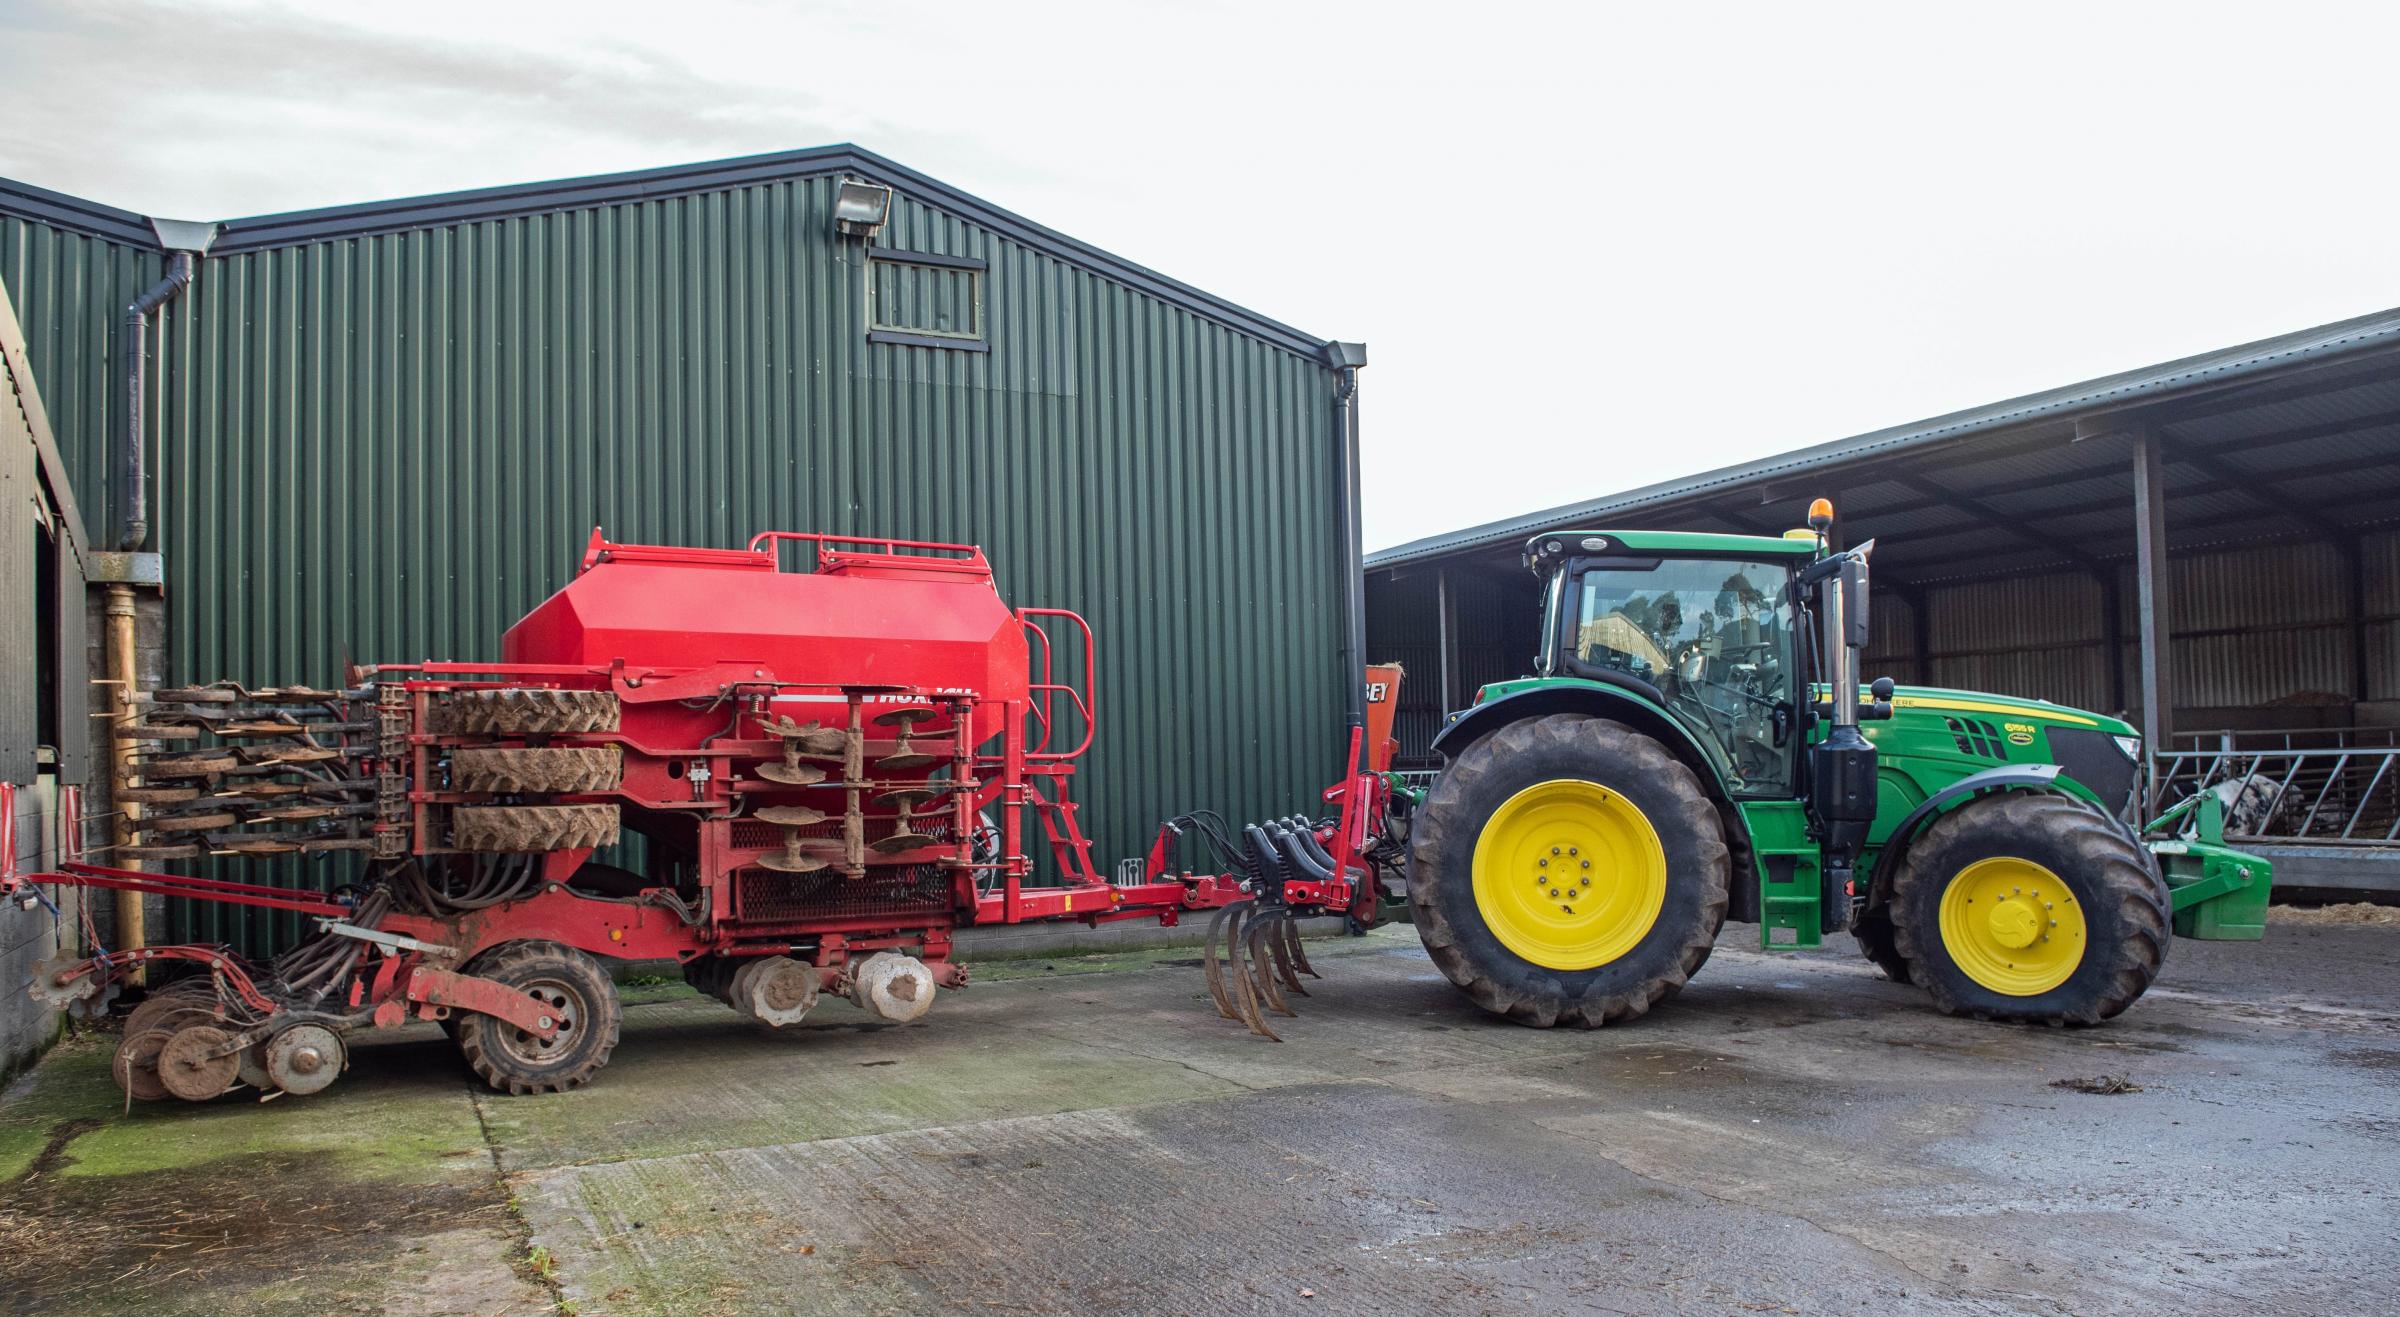 The Horsch min-till drill has become a useful tool at helping to promote better soil health and help store carbon